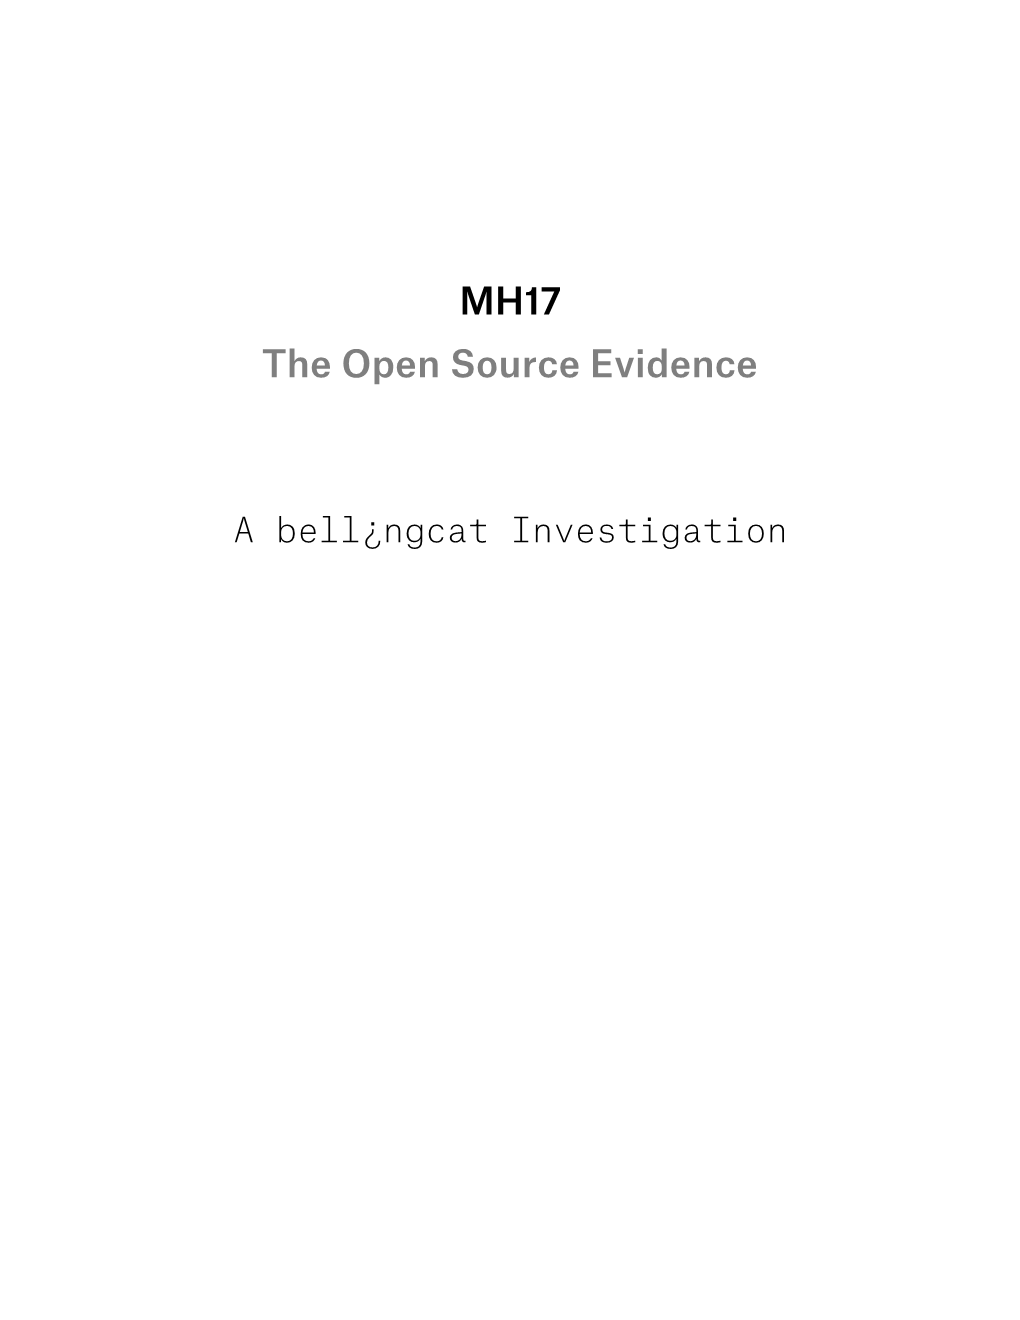 MH17 the Open Source Evidence